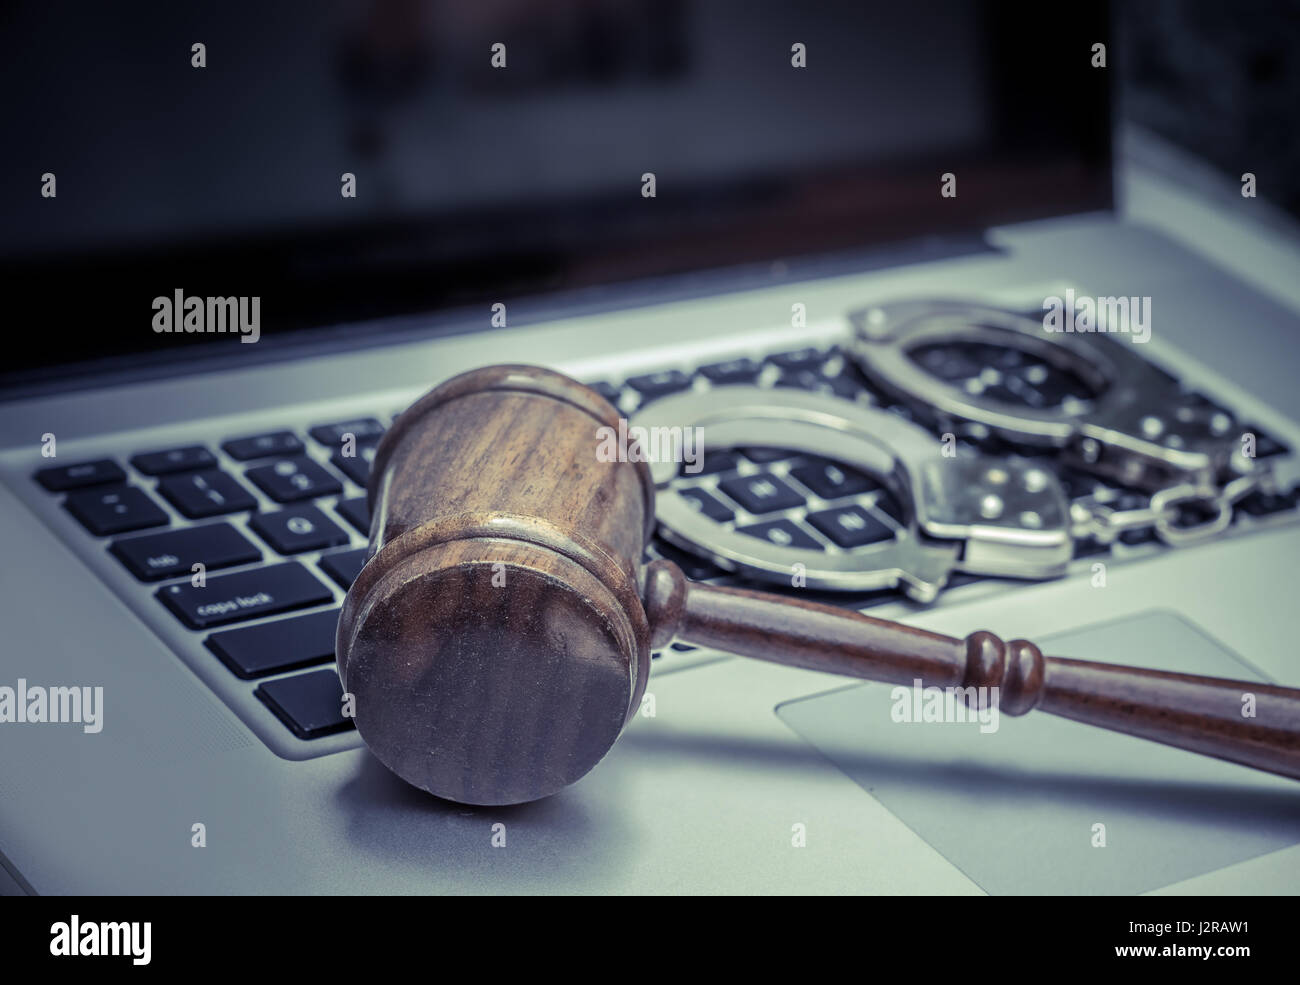 Cyber legal law concept image Stock Photo